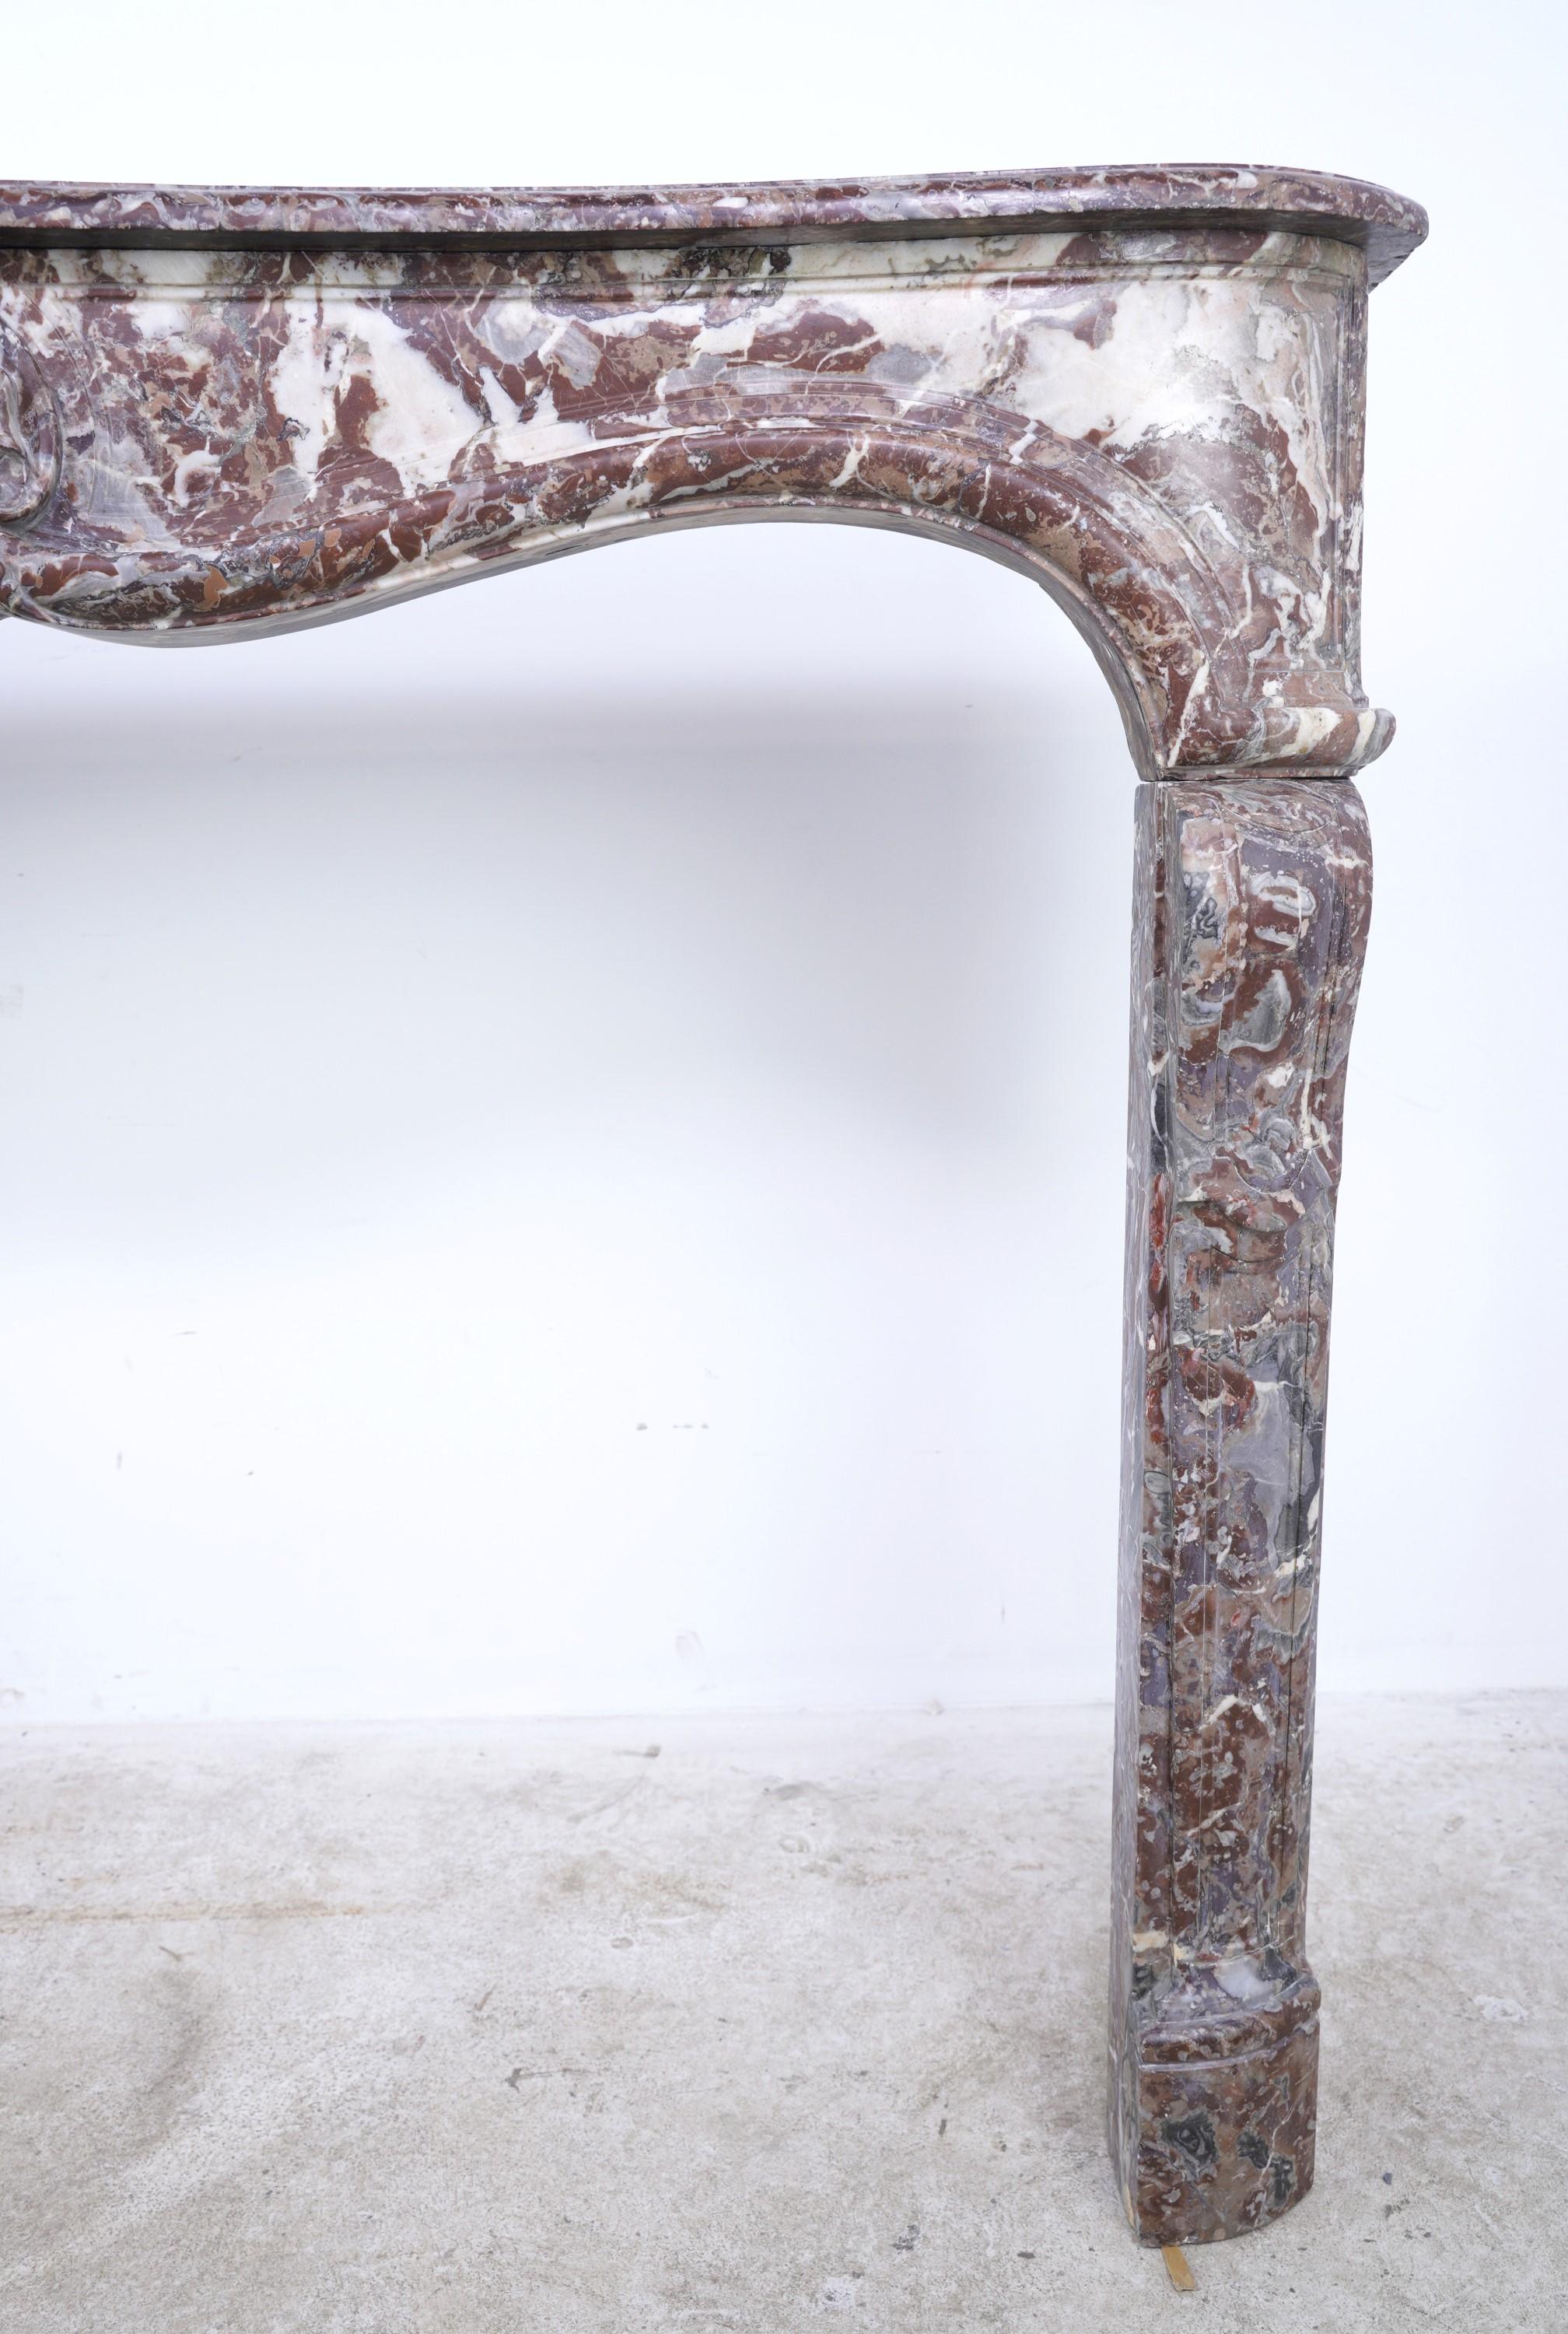 Original 18th Century Louis XV hand carved rouge royal marble mantel featuring white and grey veining. The serpentine front apron has a unique heavily carved center design and a sharply curved lower molding continuing across both side pieces. Each